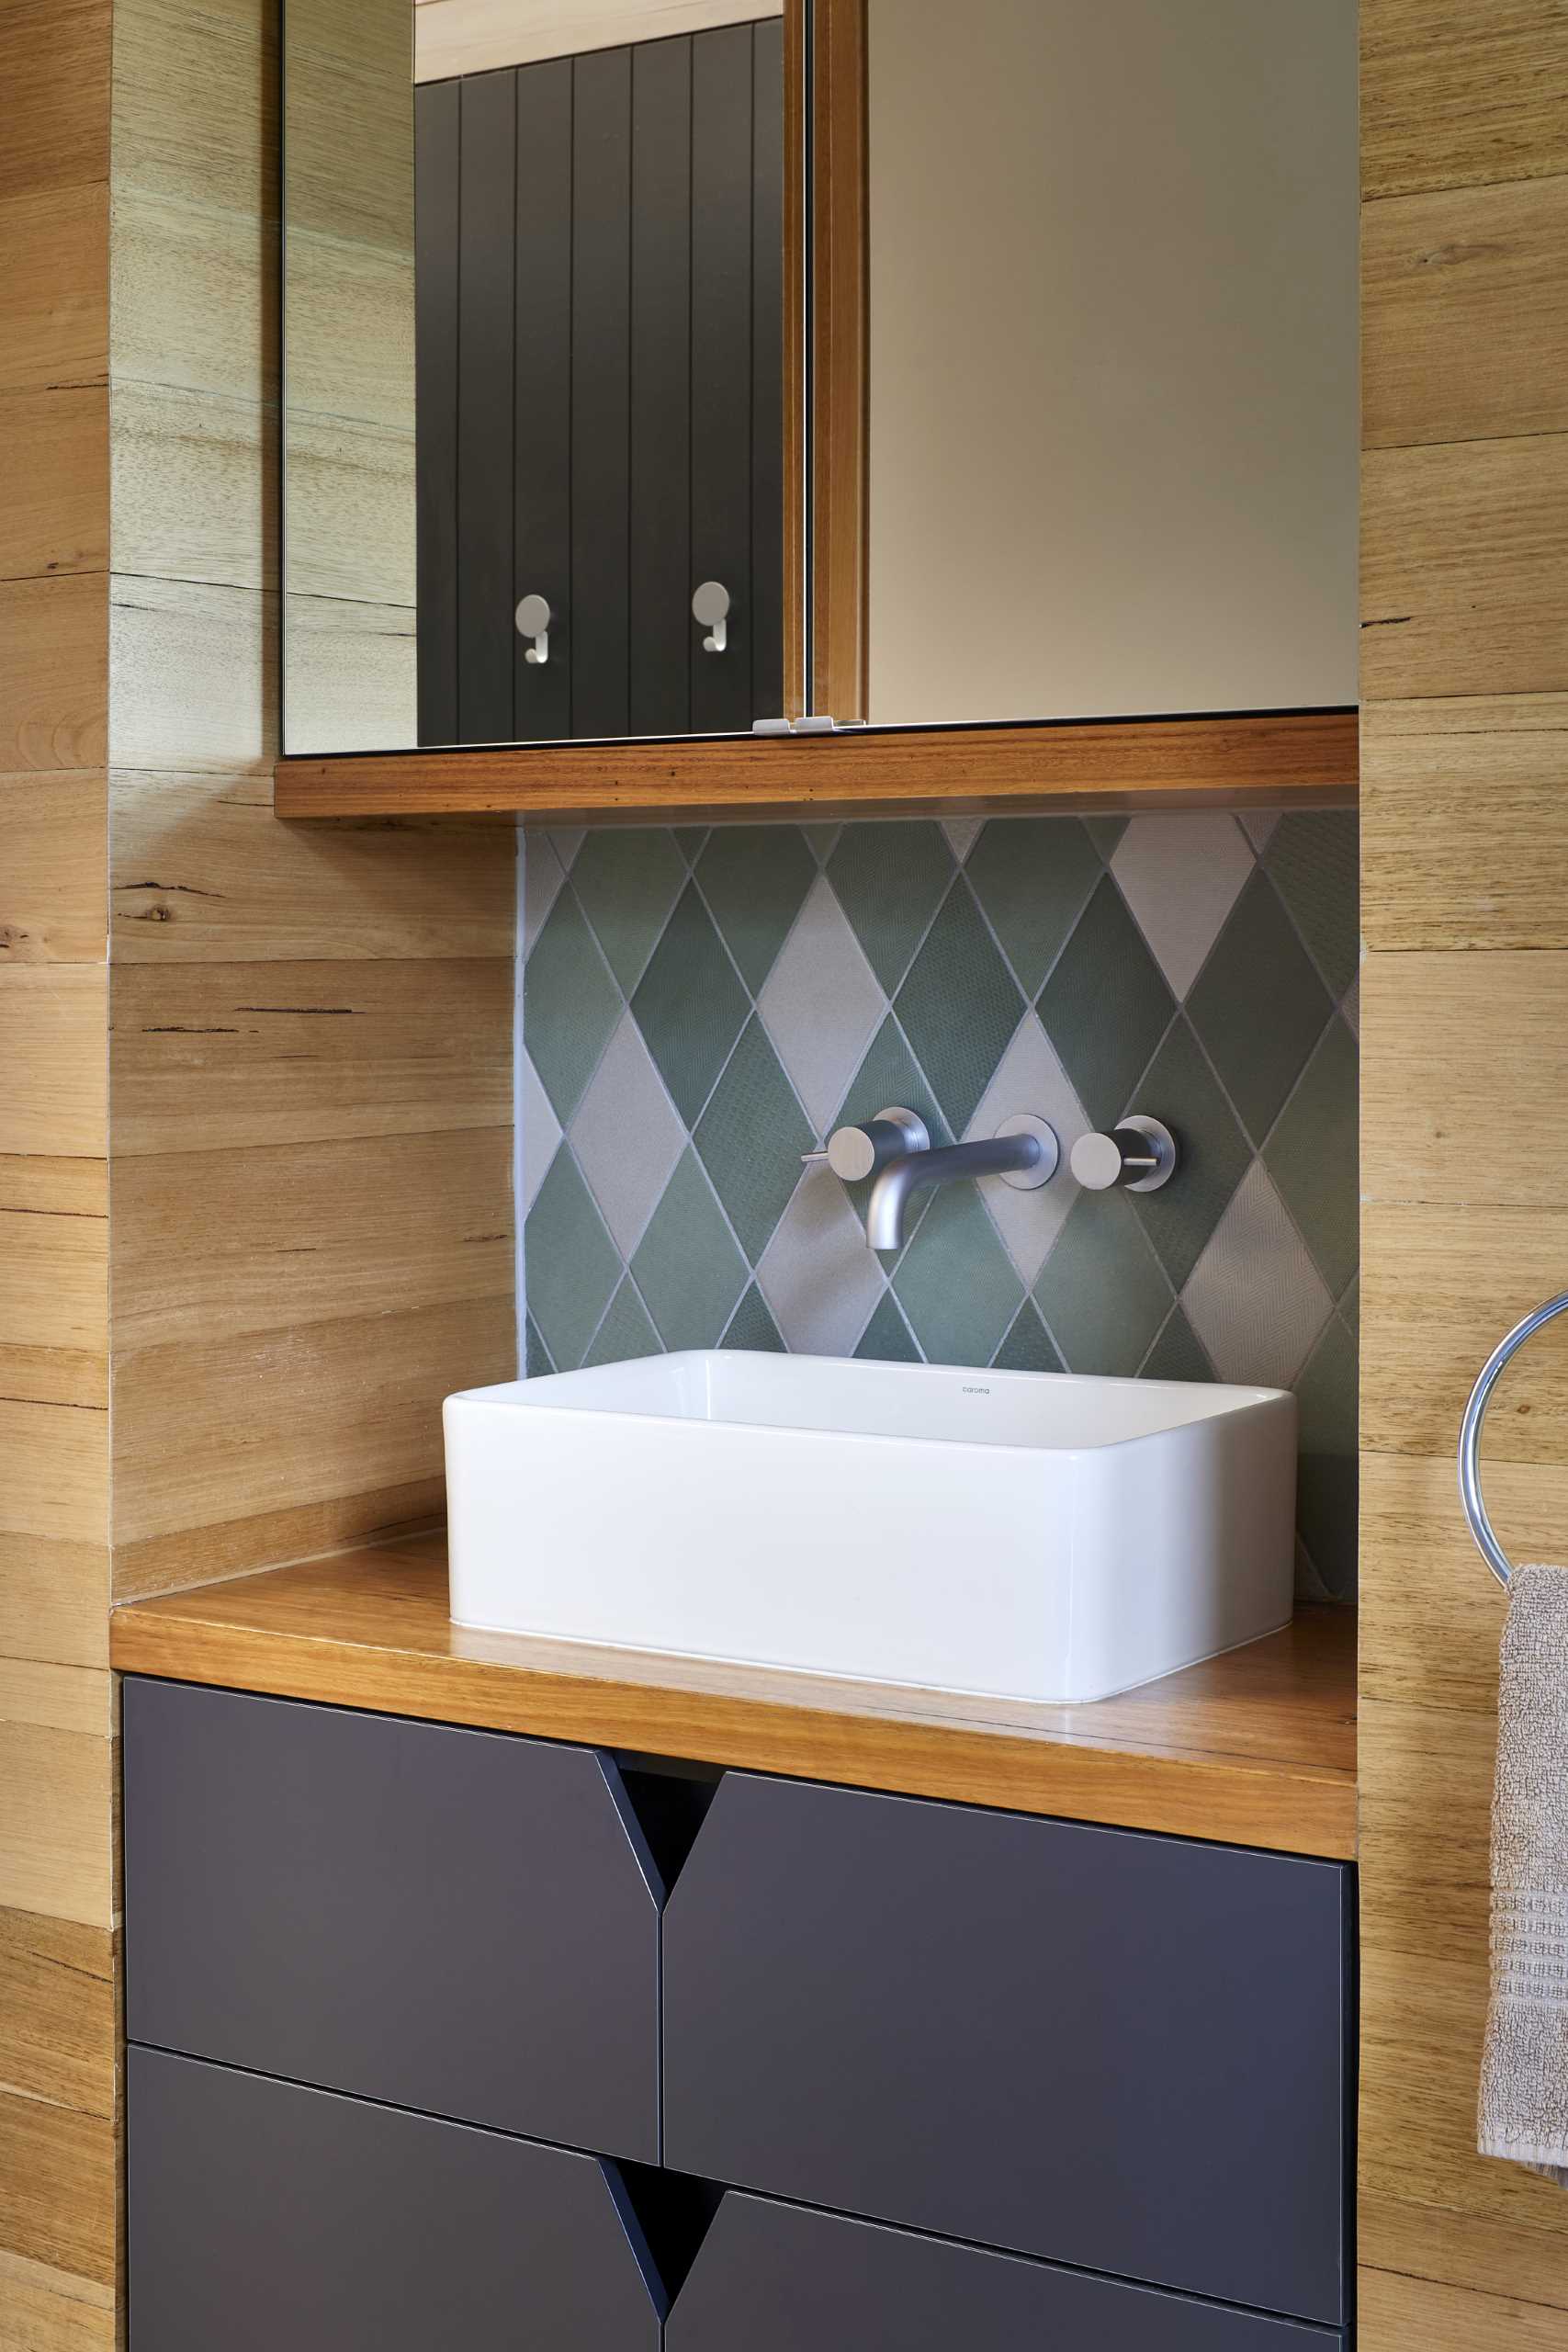 A modern bathroom includes a combination of wood flooring and square grey tiles that travel from the floor to the shower wall, while the vanity is built-in and includes dark grey cabinetry.